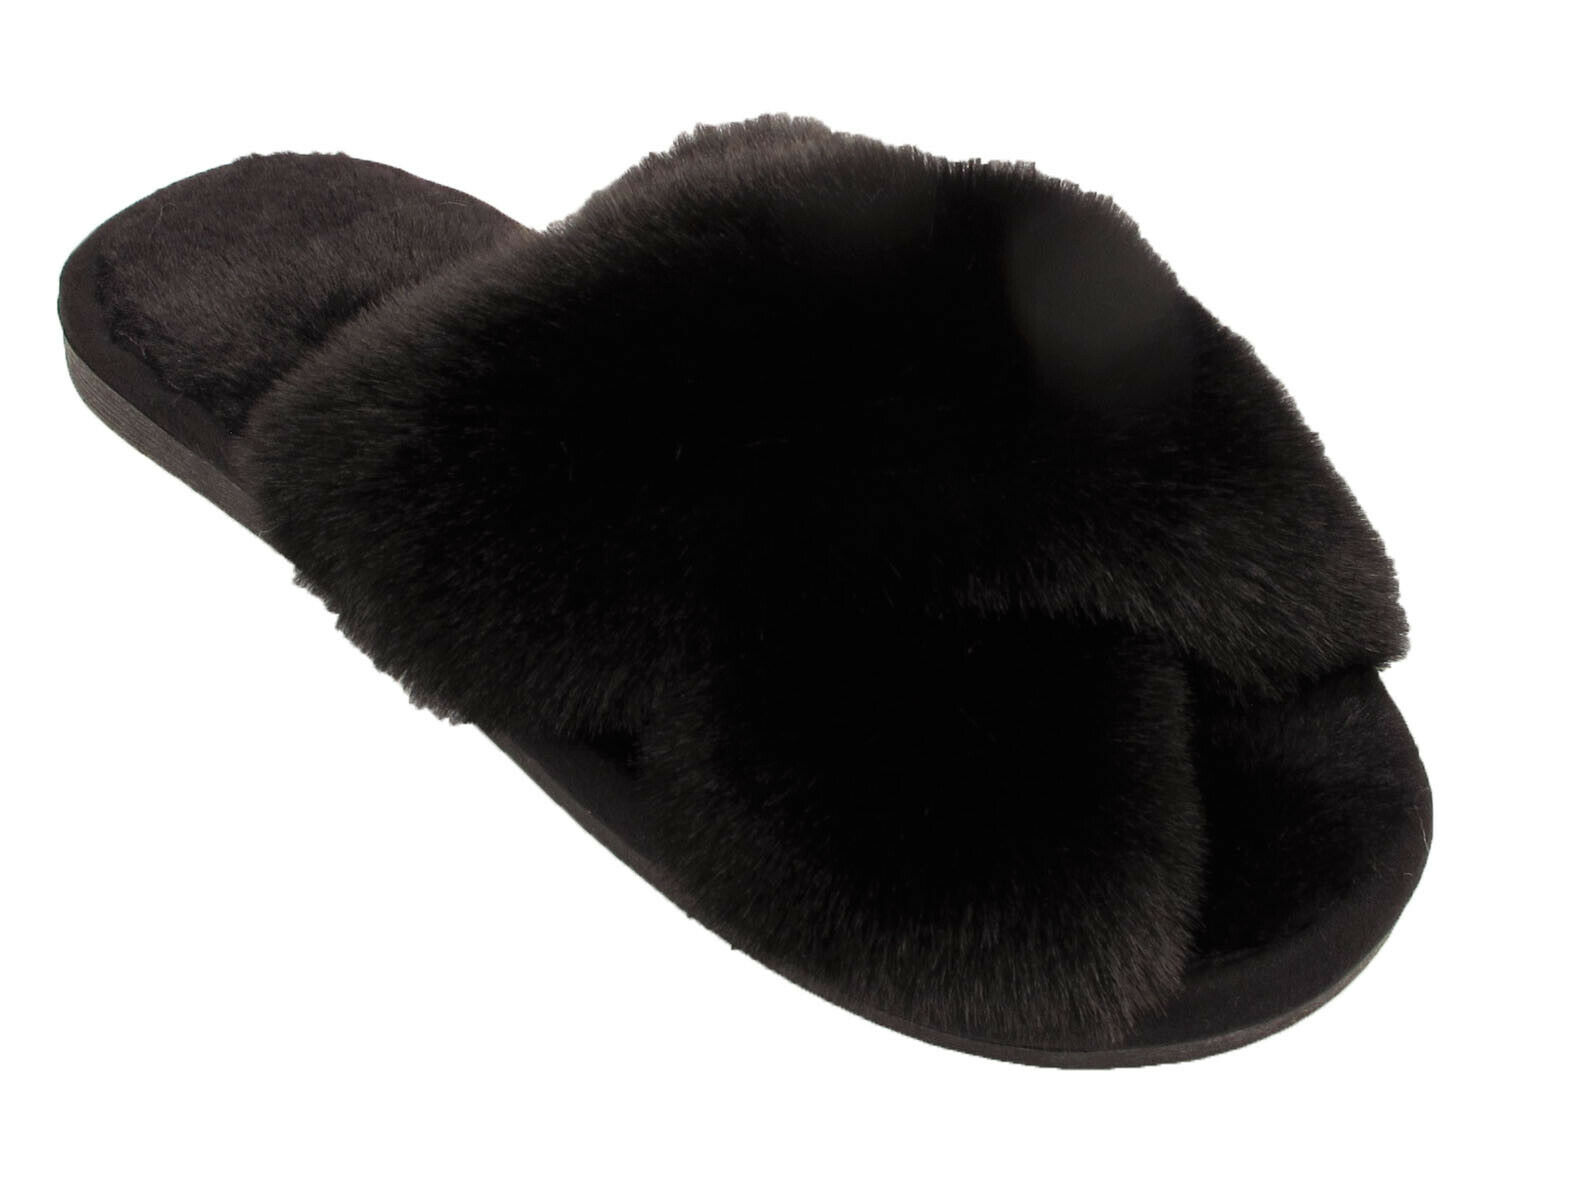 Size 7-8 Black Ladies Furry Slippers Women Fluffy Sliders Crossover Open Toe Faux Fur Mules